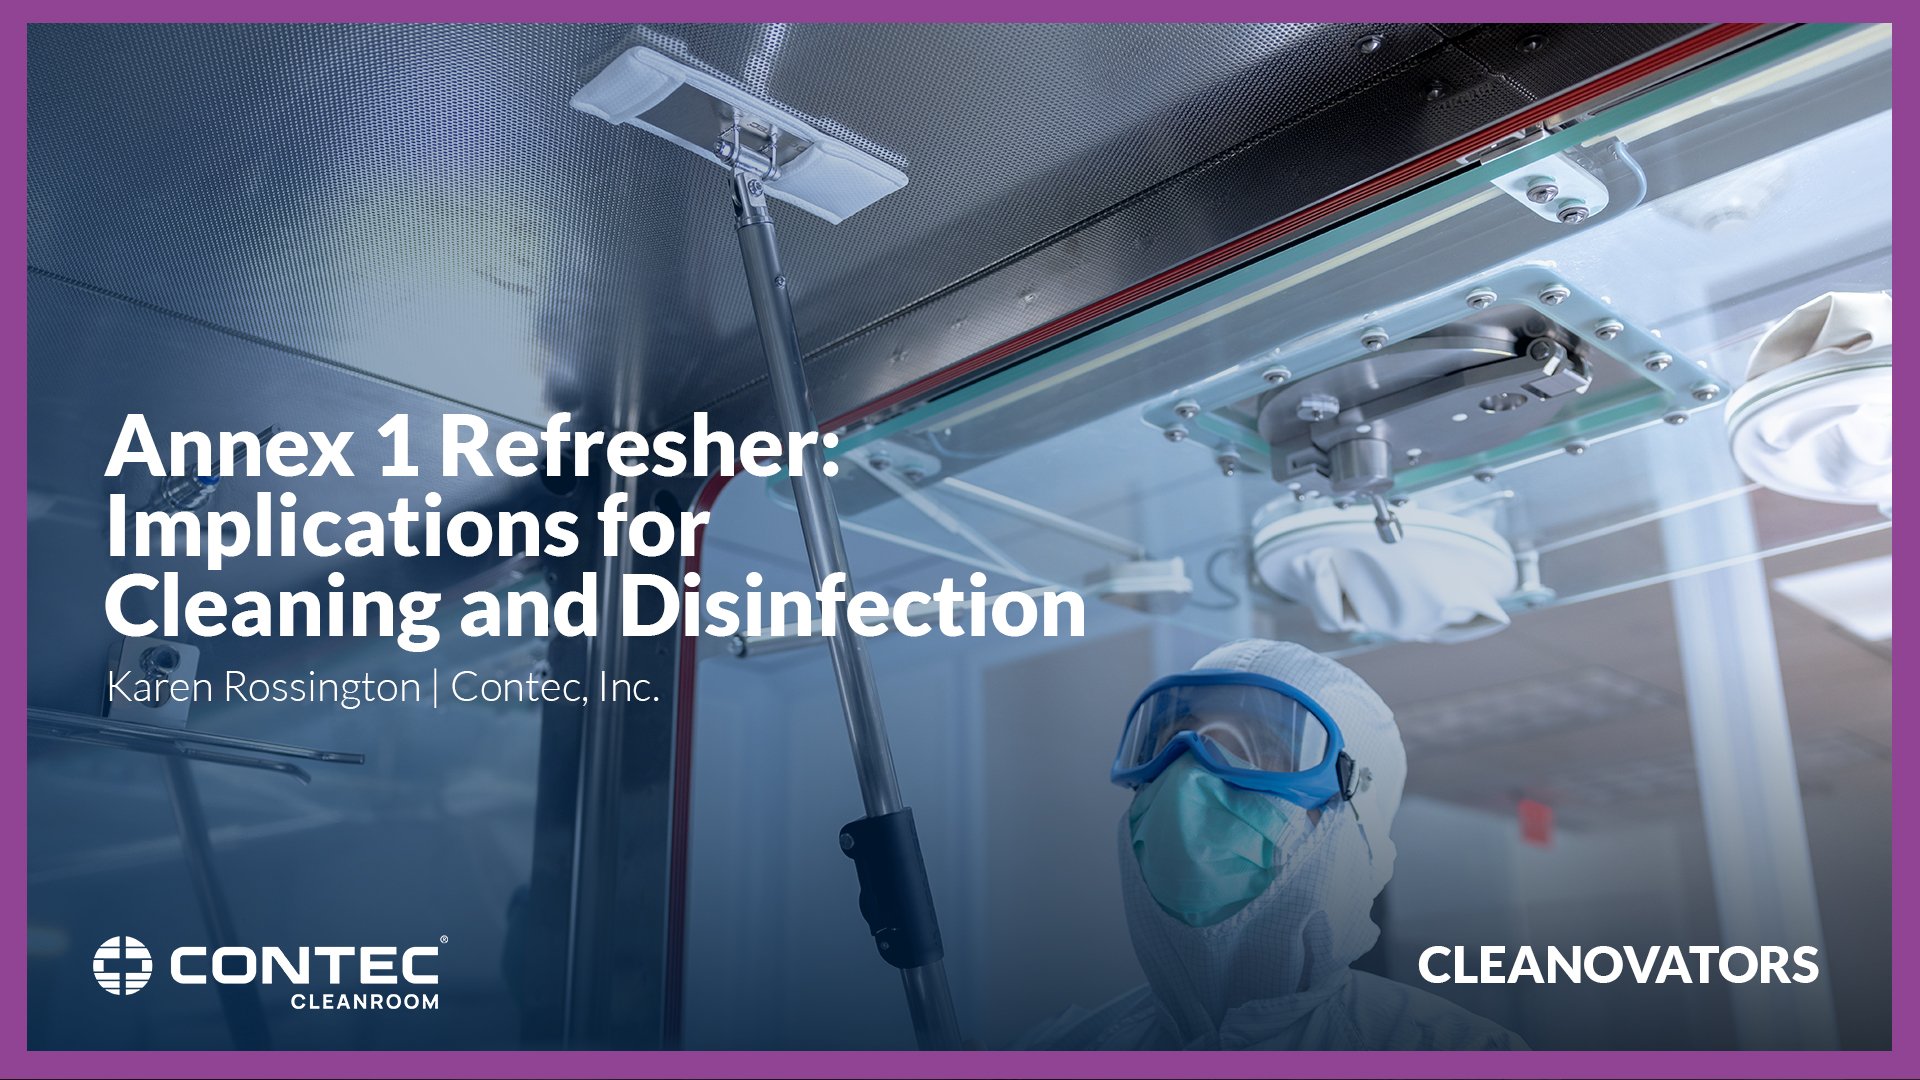 Annex 1 Refresher_ Implications for Cleaning and Disinfection